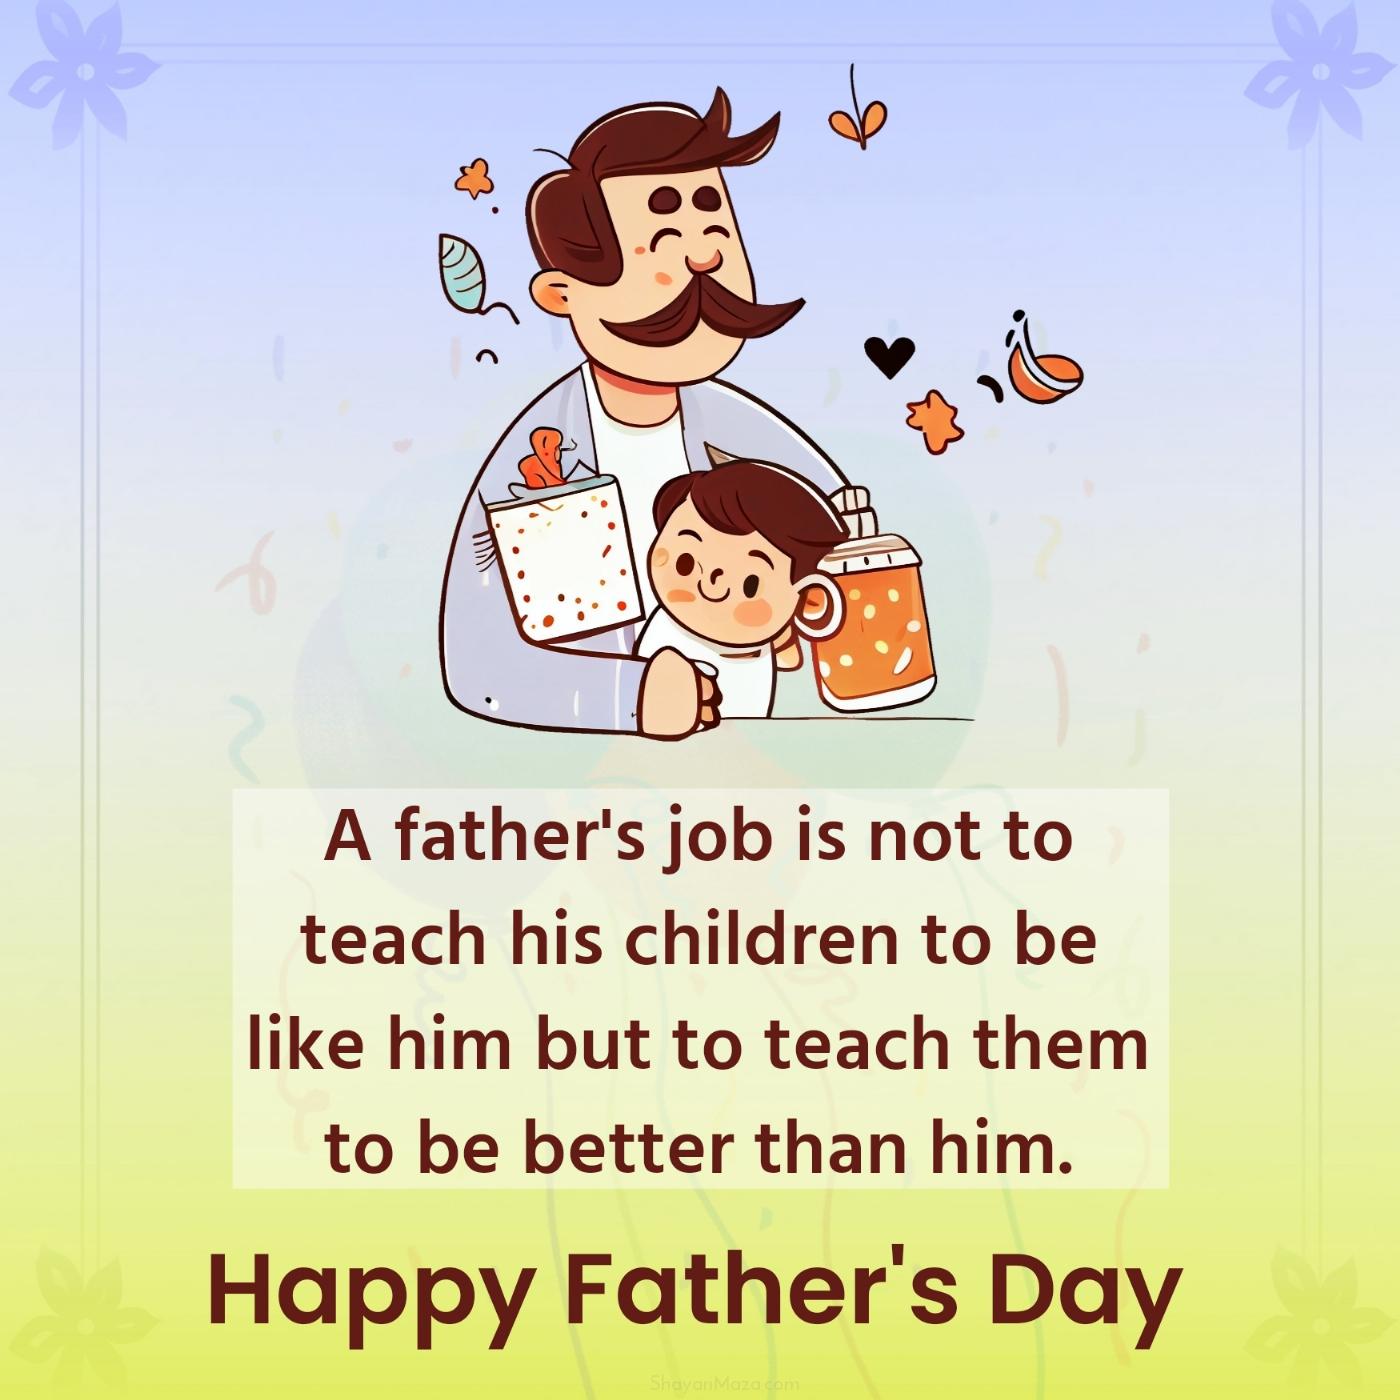 A father's job is not to teach his children to be like him